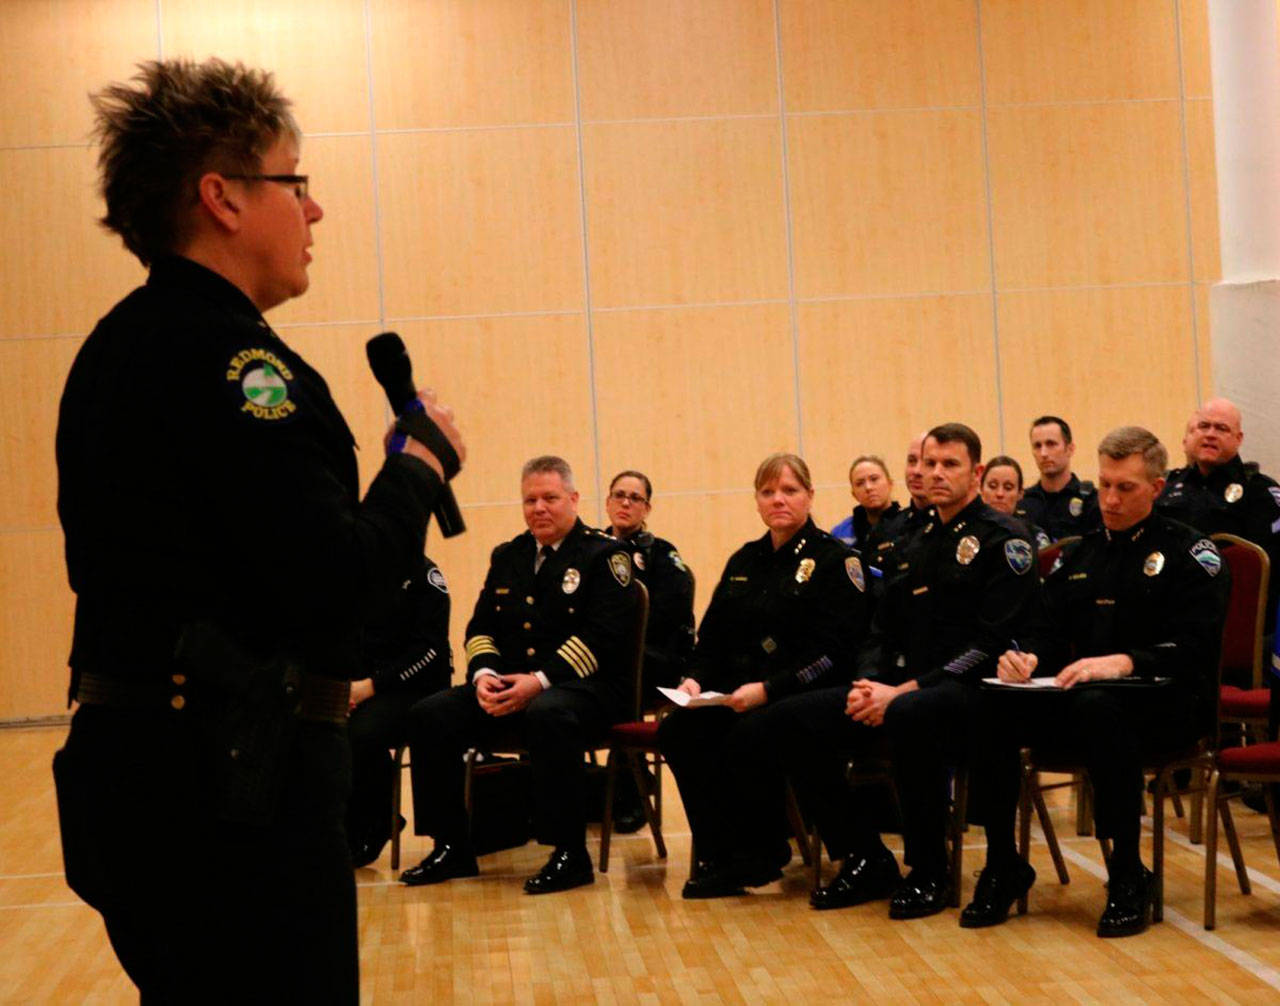 Redmond Police Department Chief Kristi Wilson, left, addresses the crowd — which features five other Eastside police chiefs in the foreground — during an Eastside Muslim Safety Forum at the Muslim Association of Puget Sound in Redmond last January. File photo